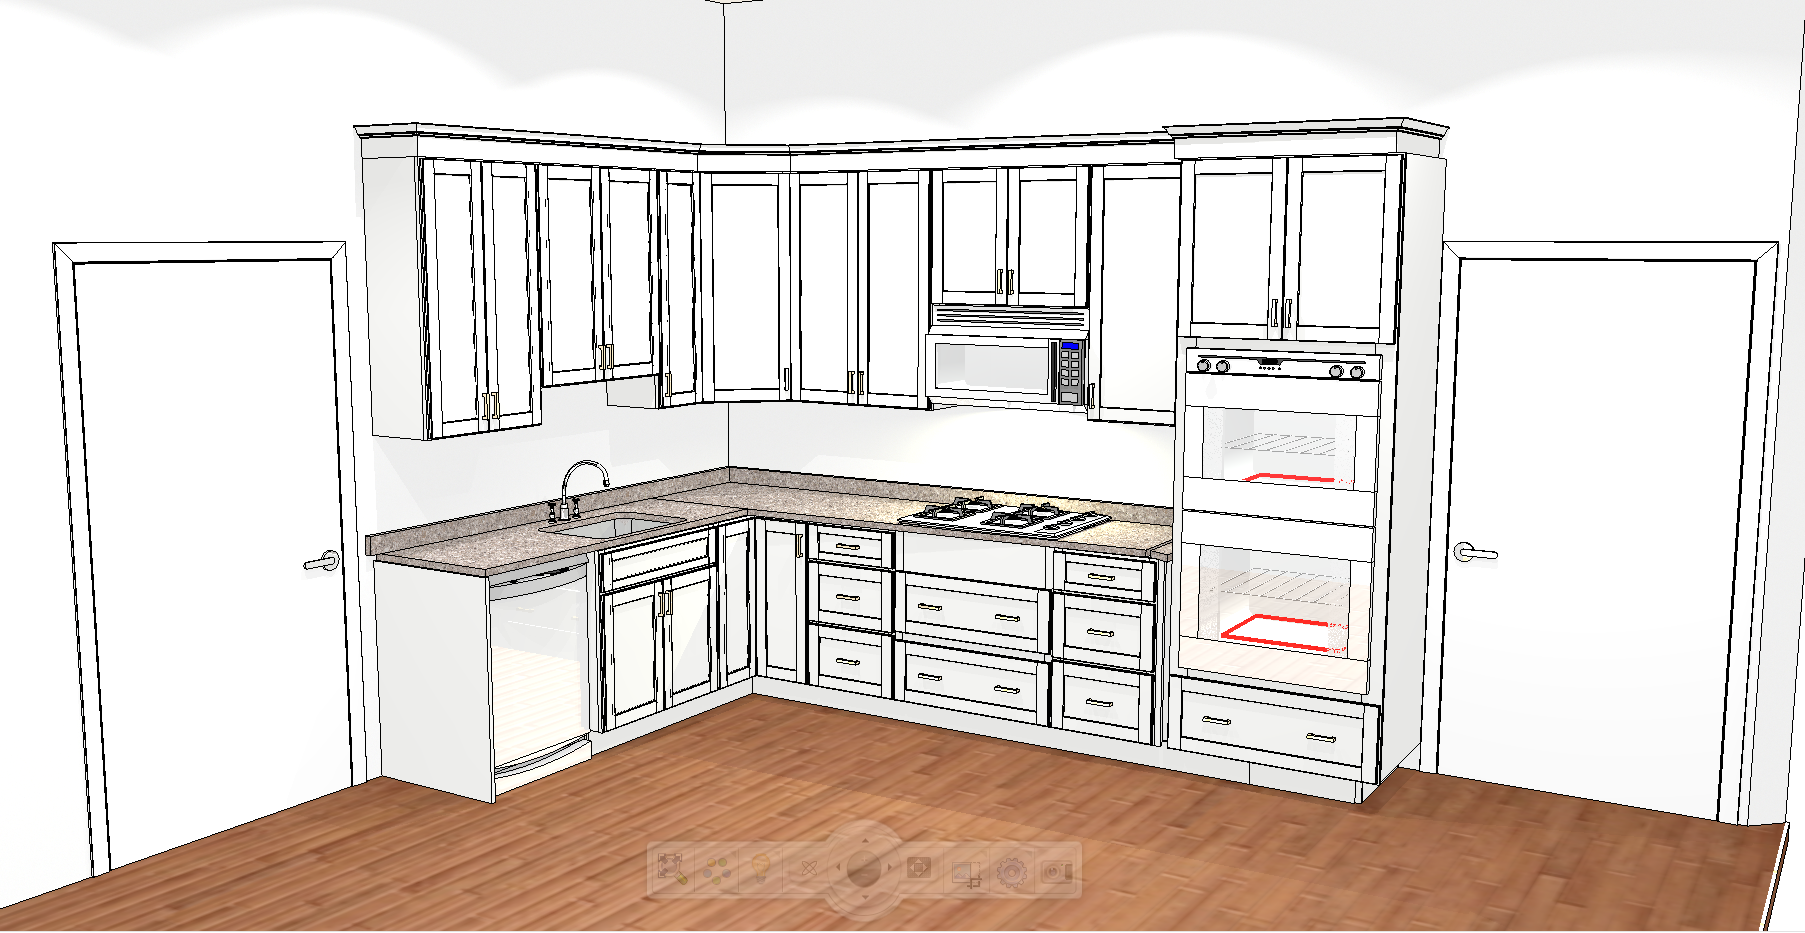 Tips for Positioning the Shelves in the Oven for Baking, Miller Maytag  Home Appliance Center